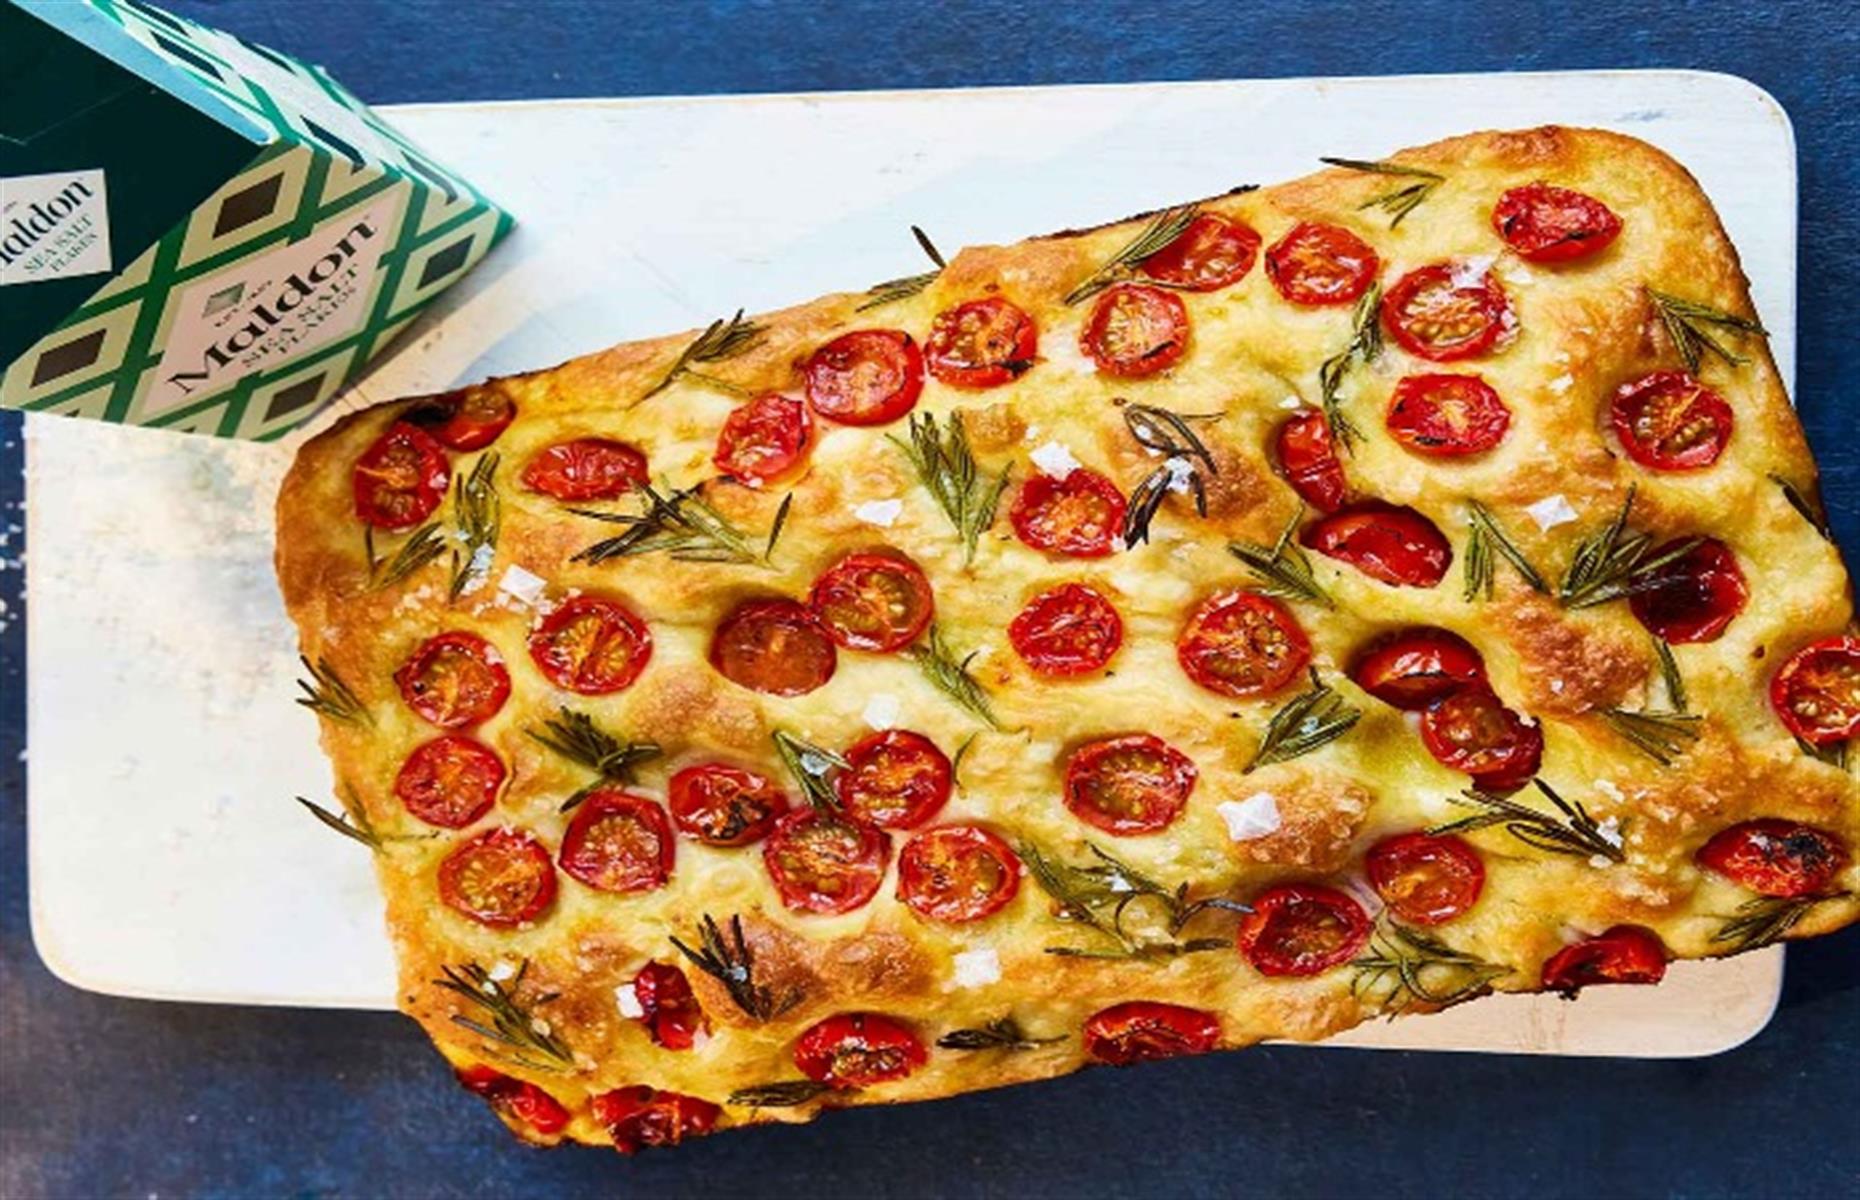 <p>This simple focaccia recipe has a real wow factor, thanks to fragrant, sticky cherry tomatoes, aromatic fresh rosemary, and a good glug of extra virgin olive oil and a sprinkling of sea salt to finish. Serve it with soft cheeses or with an olive oil and balsamic vinegar dip.</p>  <p><a href="https://www.lovefood.com/recipes/114469/cherry-tomato-and-rosemary-focaccia-recipe"><strong>Get the recipe for cherry tomato focaccia here</strong></a></p>